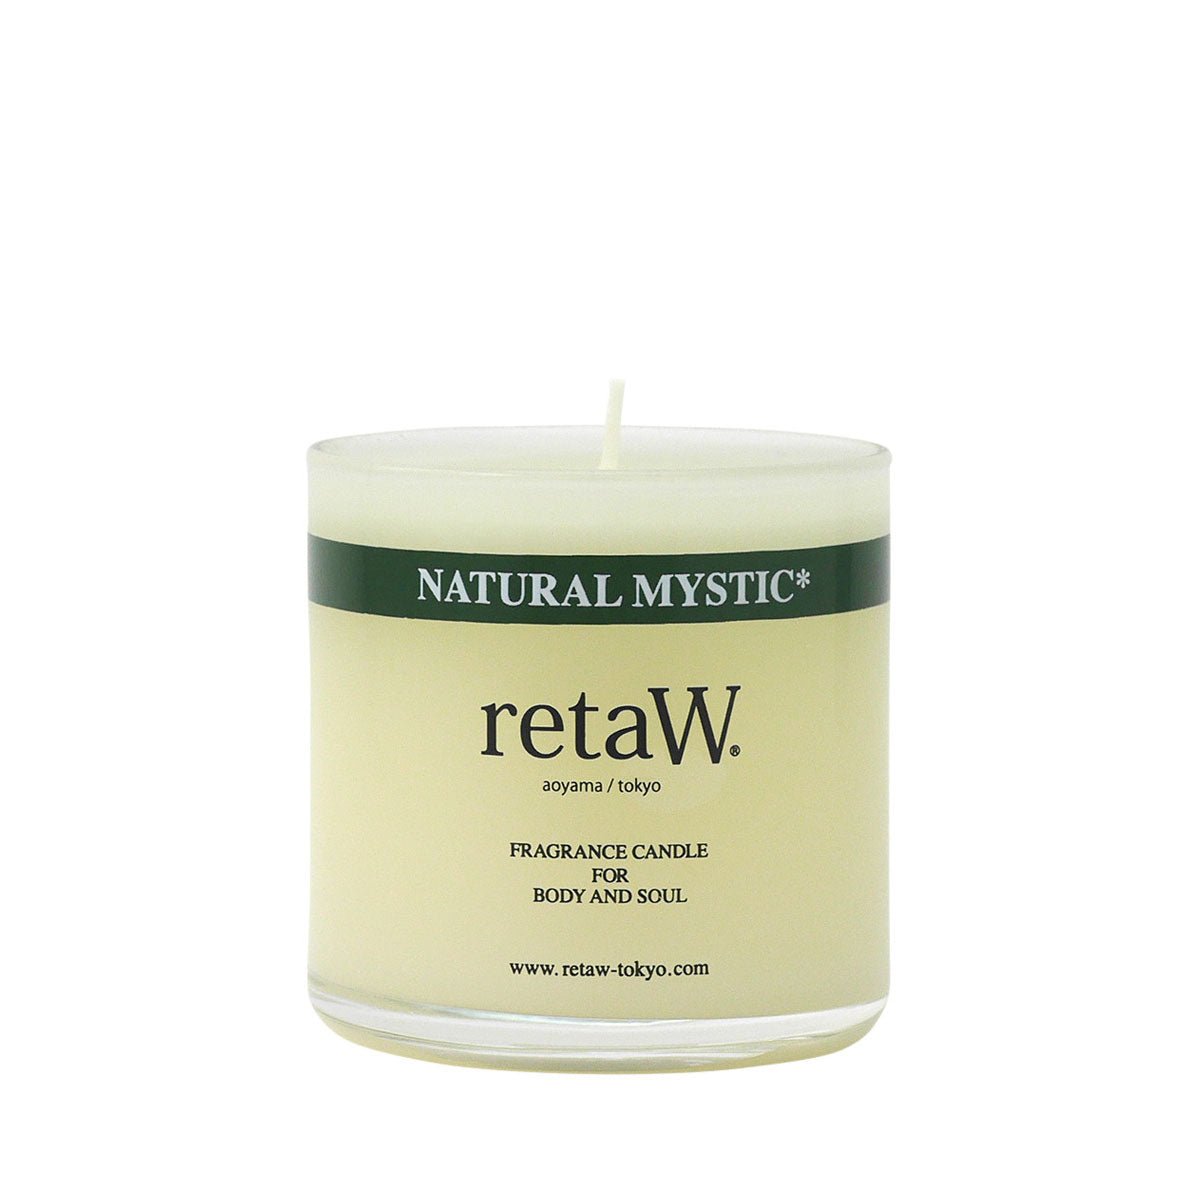 Image of retaW Fragrance Candle Natural Mystic